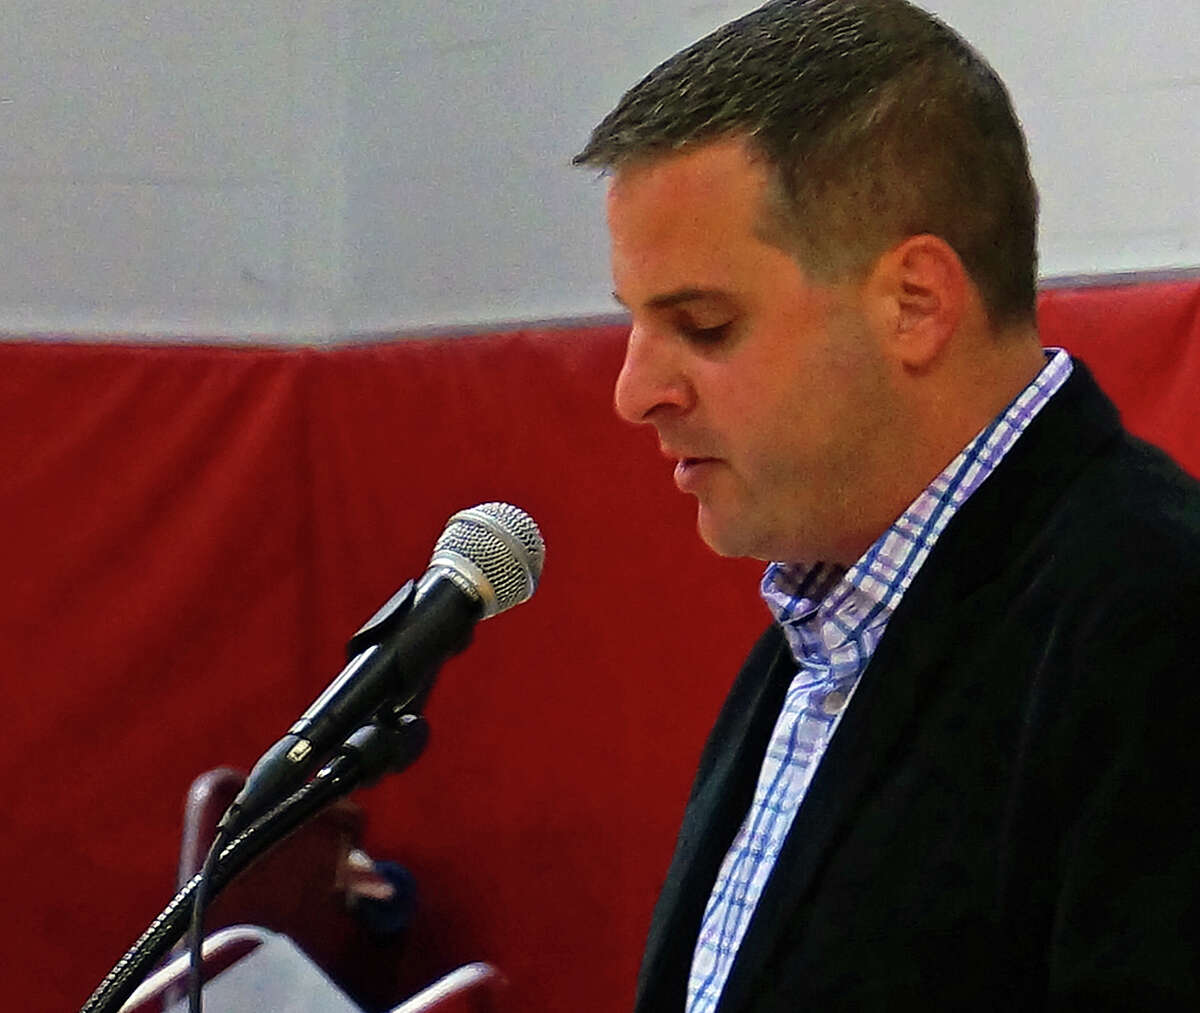 Joseph Palmer, R-4, made the motion at the Representative Town Meeting's budget meeting Monday to cut $500,000 from the Board of Education budget for 2014-15.